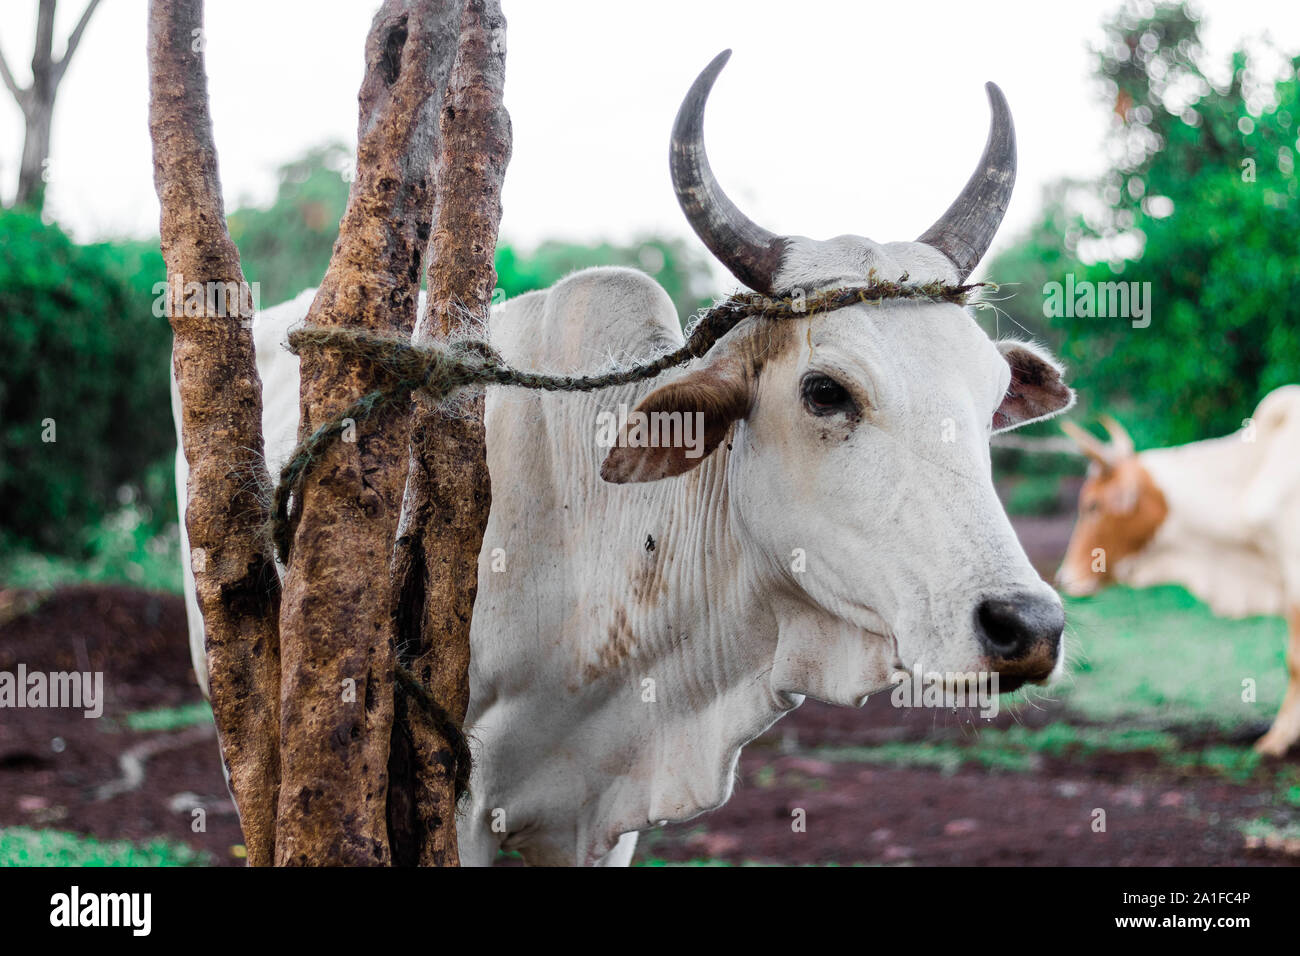 White cow with horns tied to tree Stock Photo